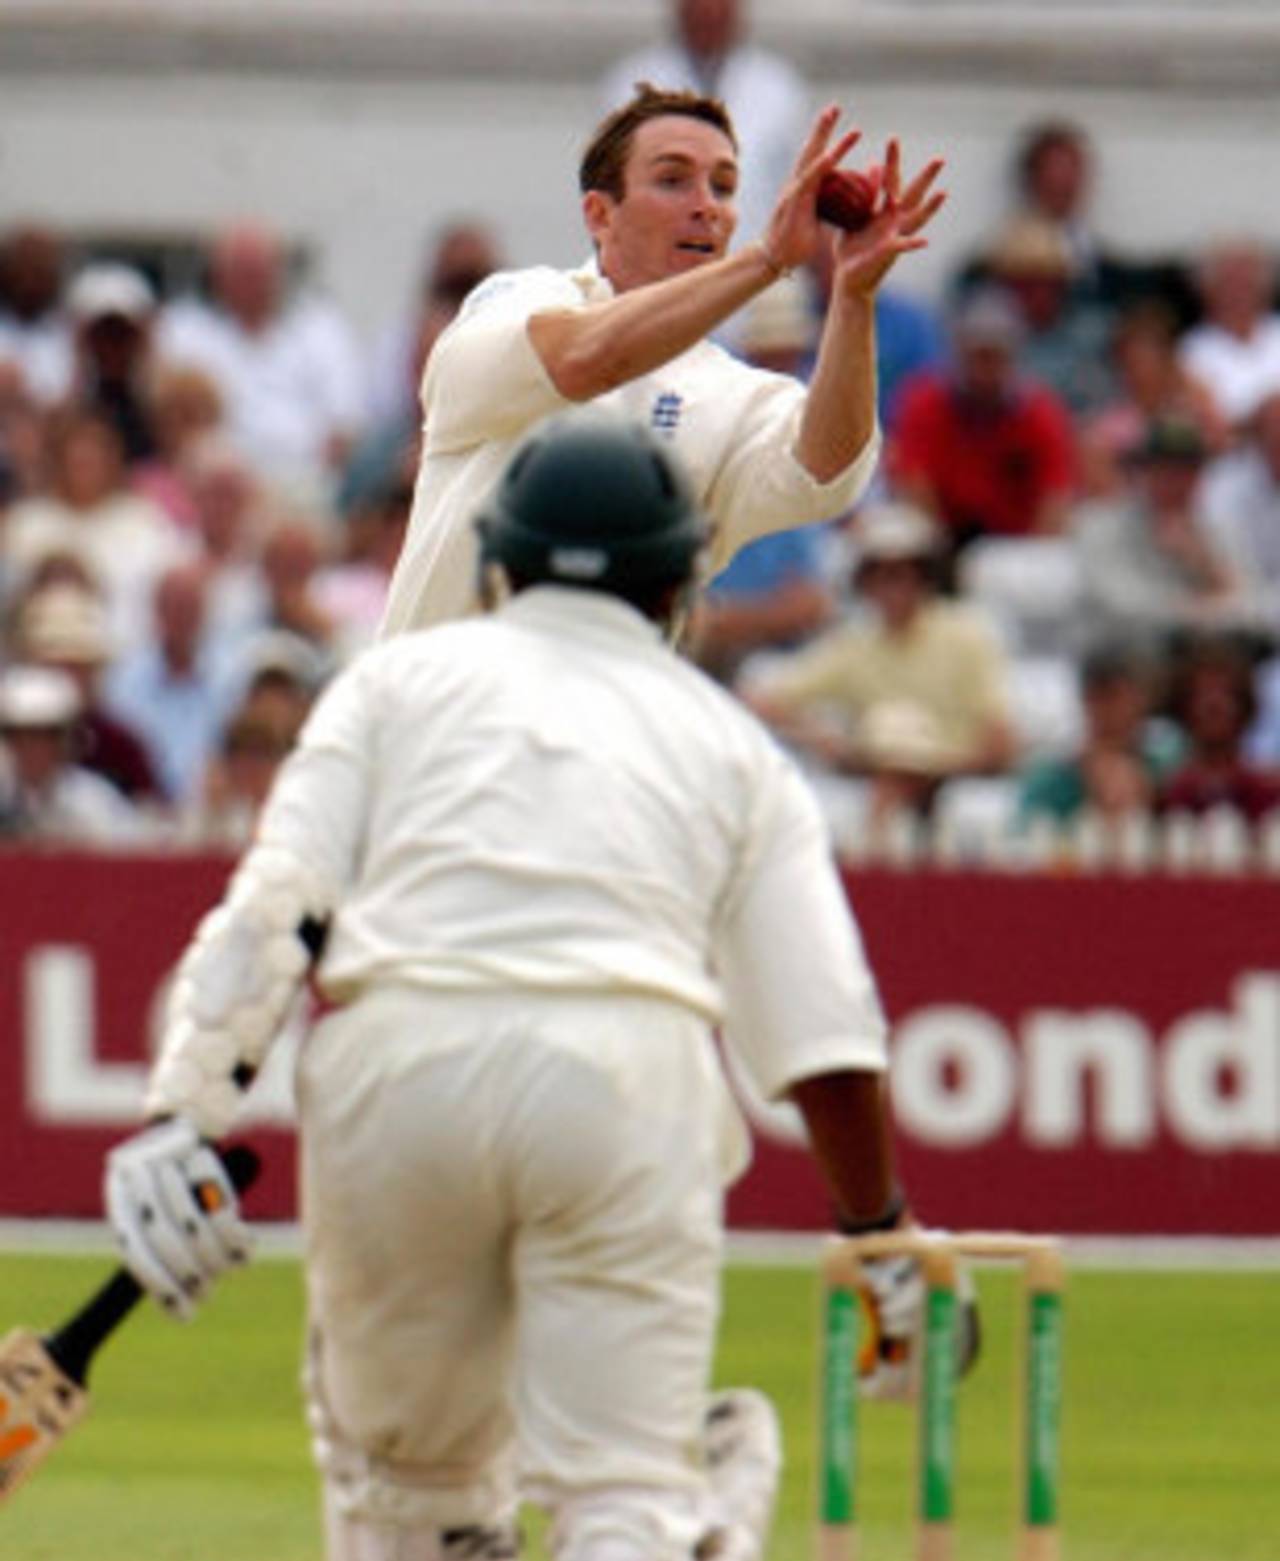 James Kirtley takes a catch off his own bowling to dismiss Paul Adams, England v South Africa, 3rd Test, Trent Bridge, 5th day, August 18, 2003